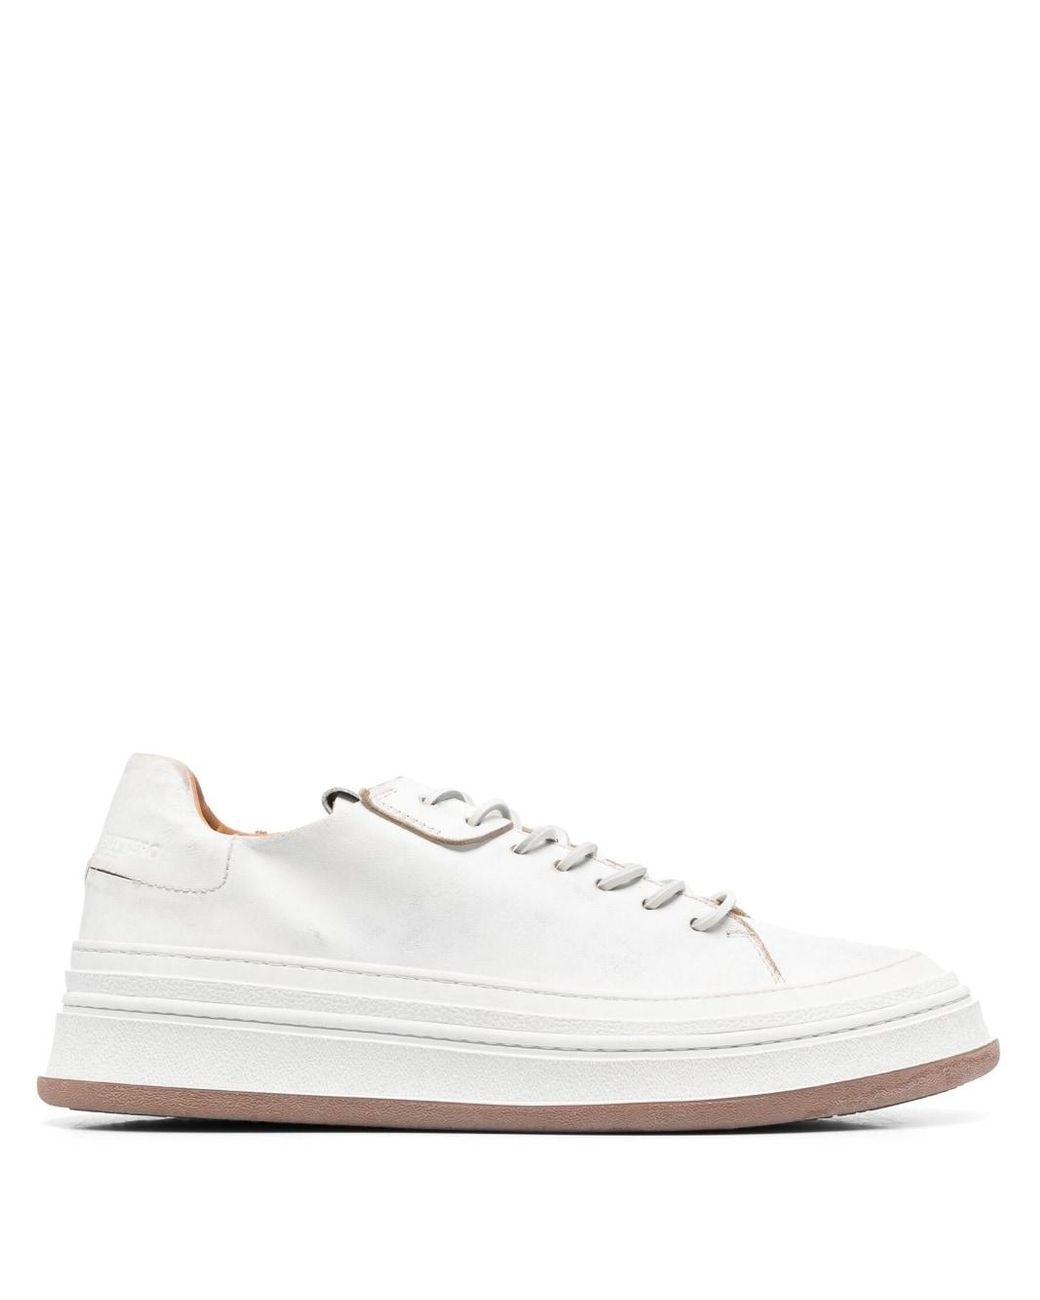 Buttero Low-top Leather Sneakers in White for Men | Lyst